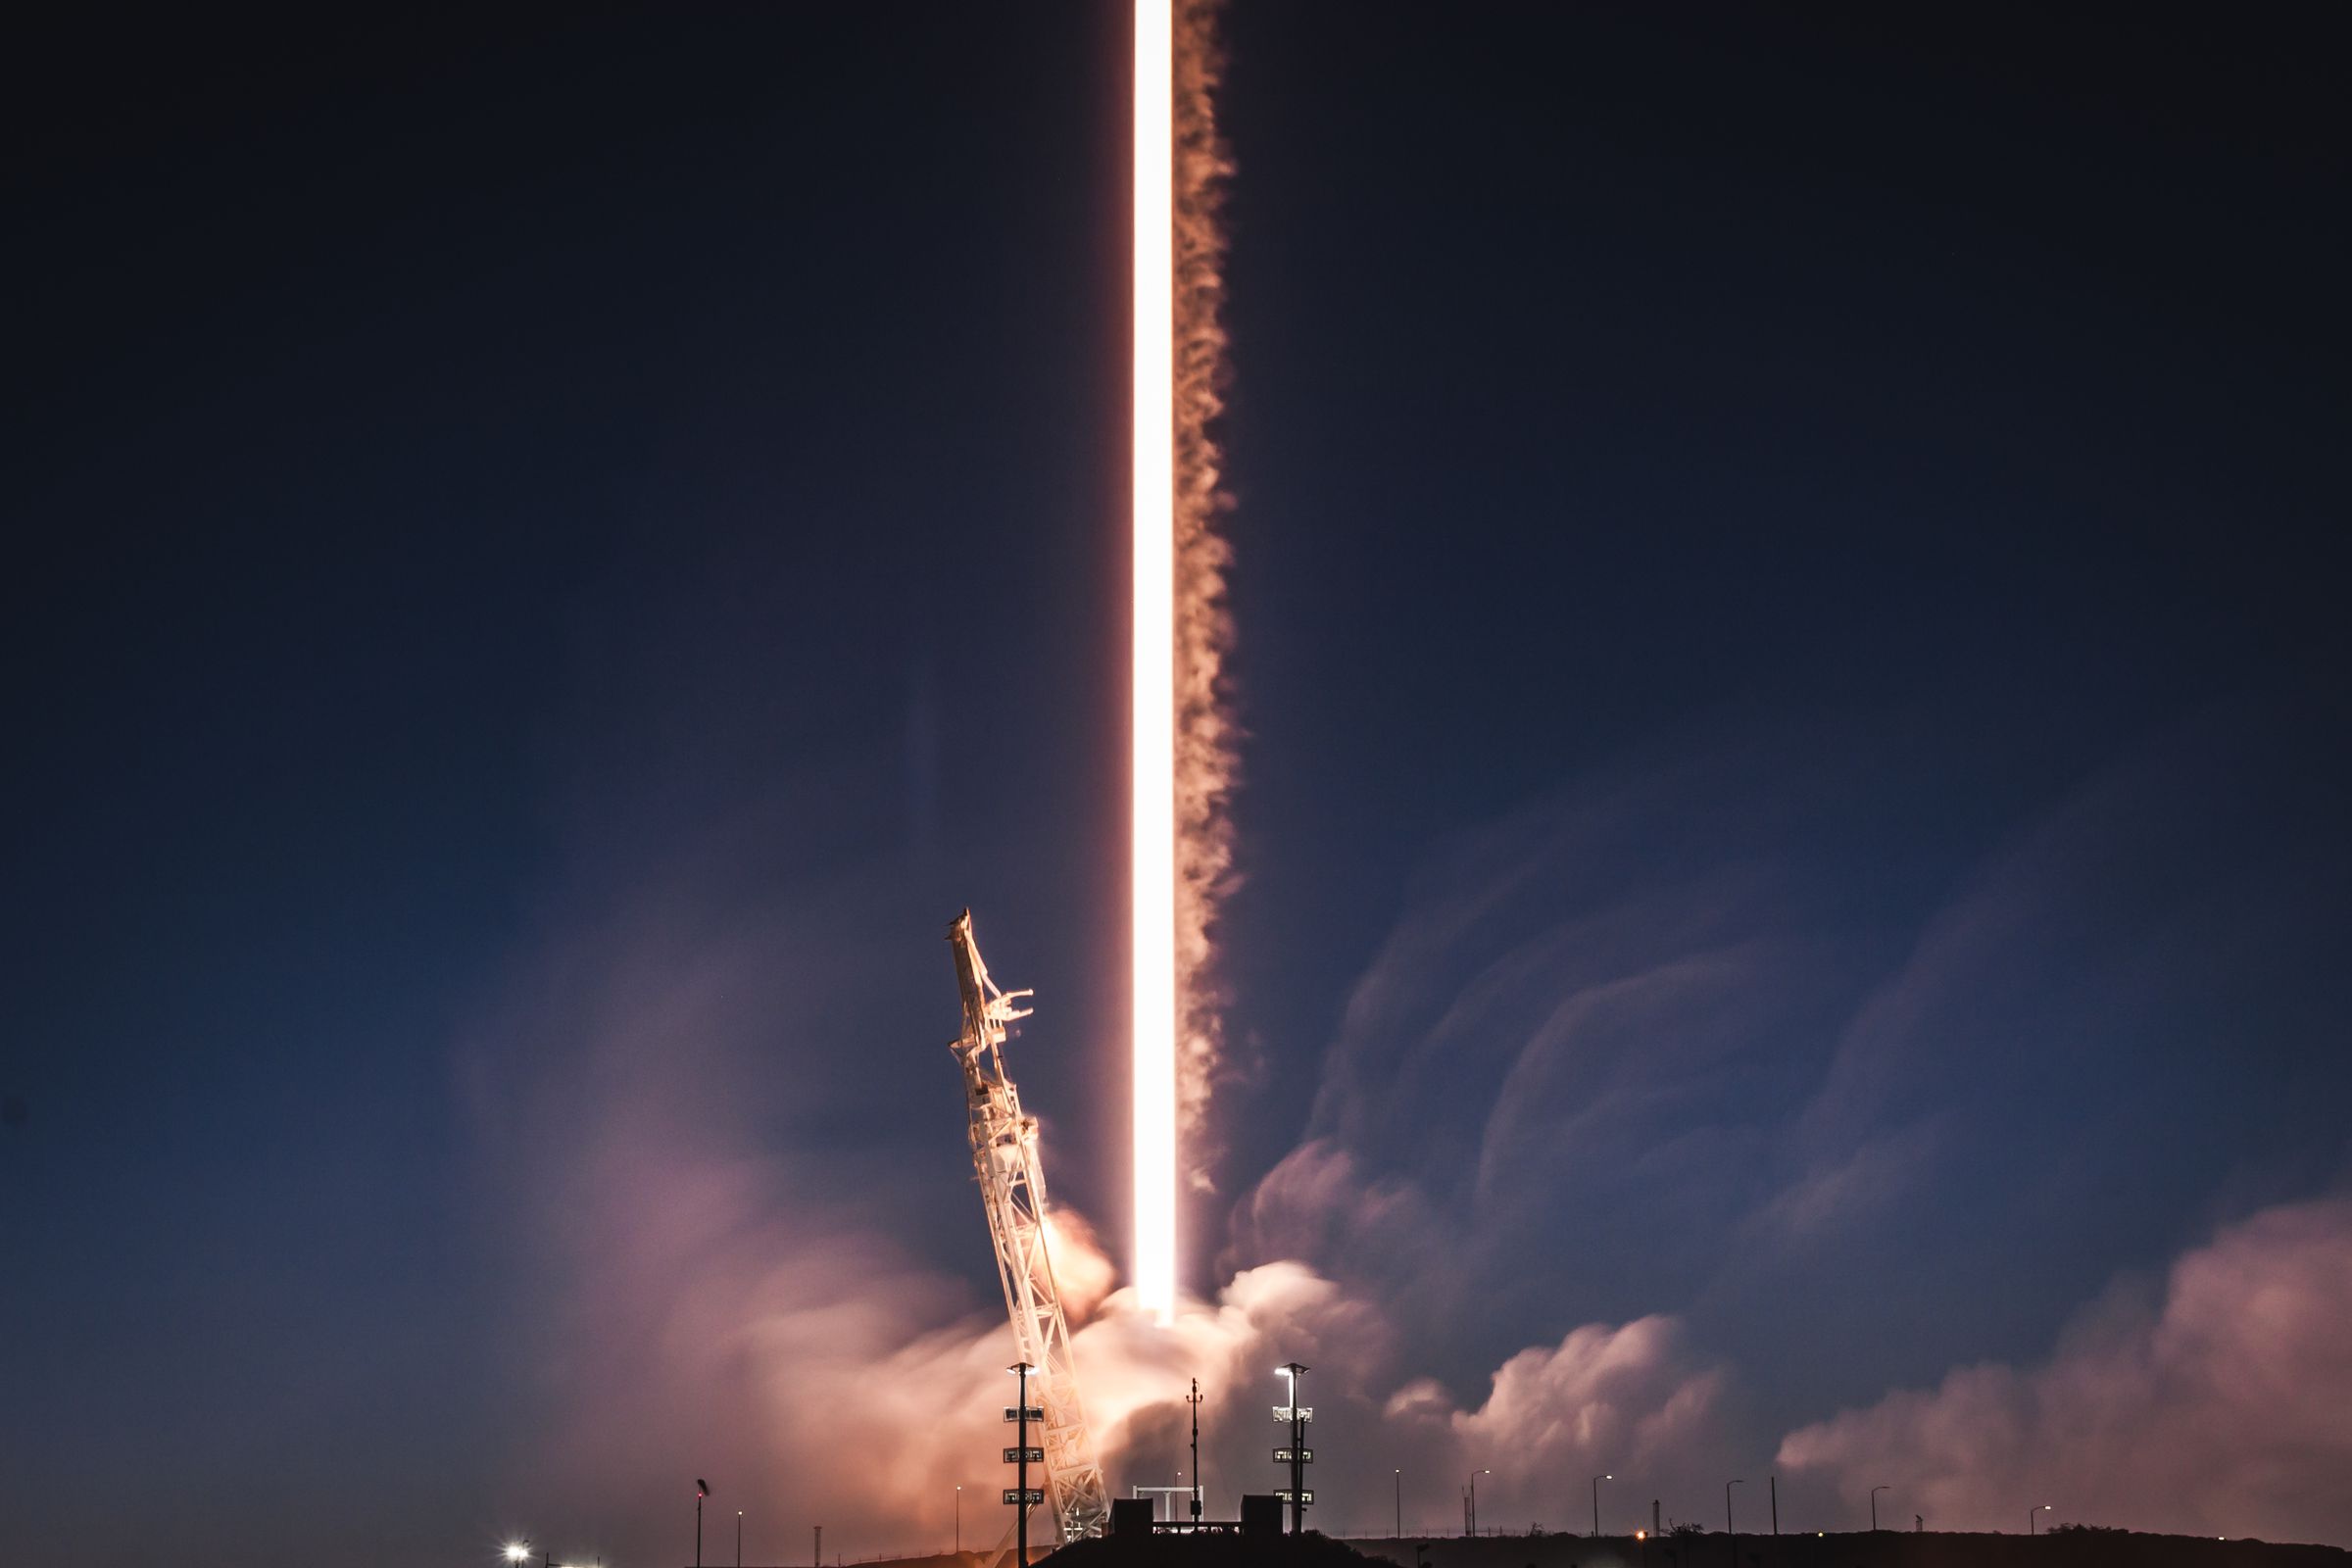 A SpaceX Falcon 9 rocket, launching the company’s two test Starlink satellites